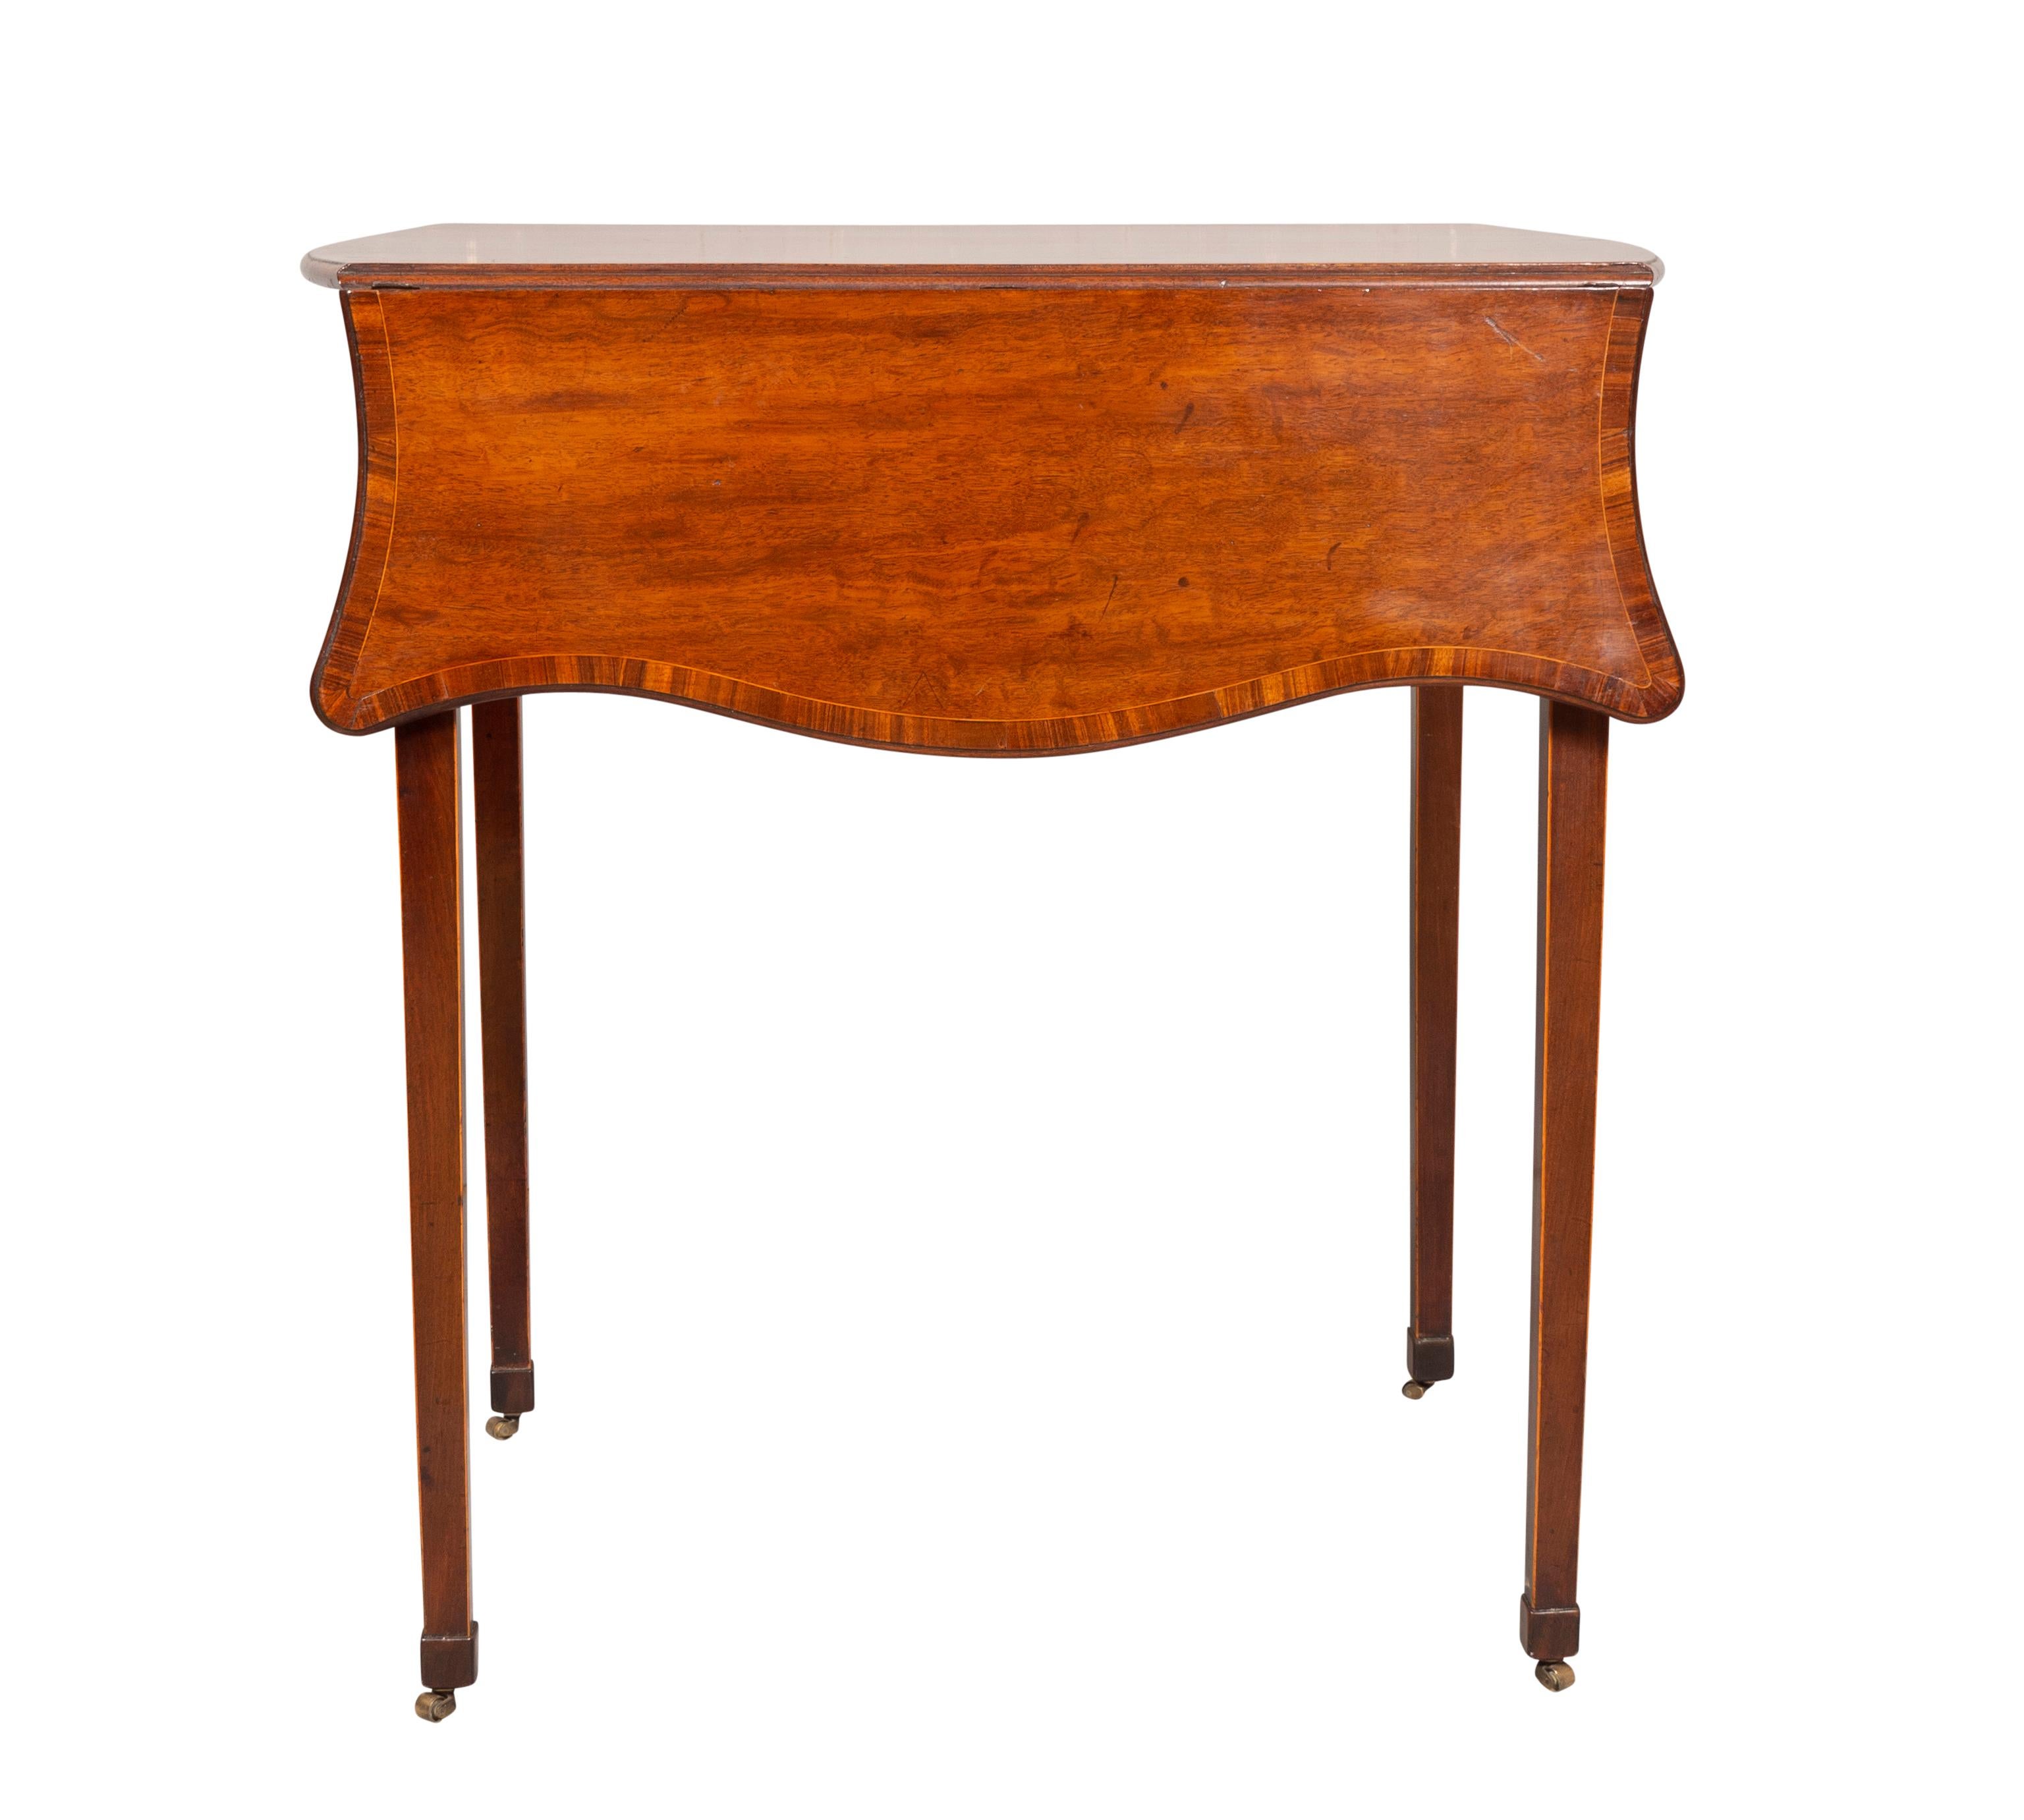 English George III Mahogany And Gonsalvo Alves Pembroke Table For Sale